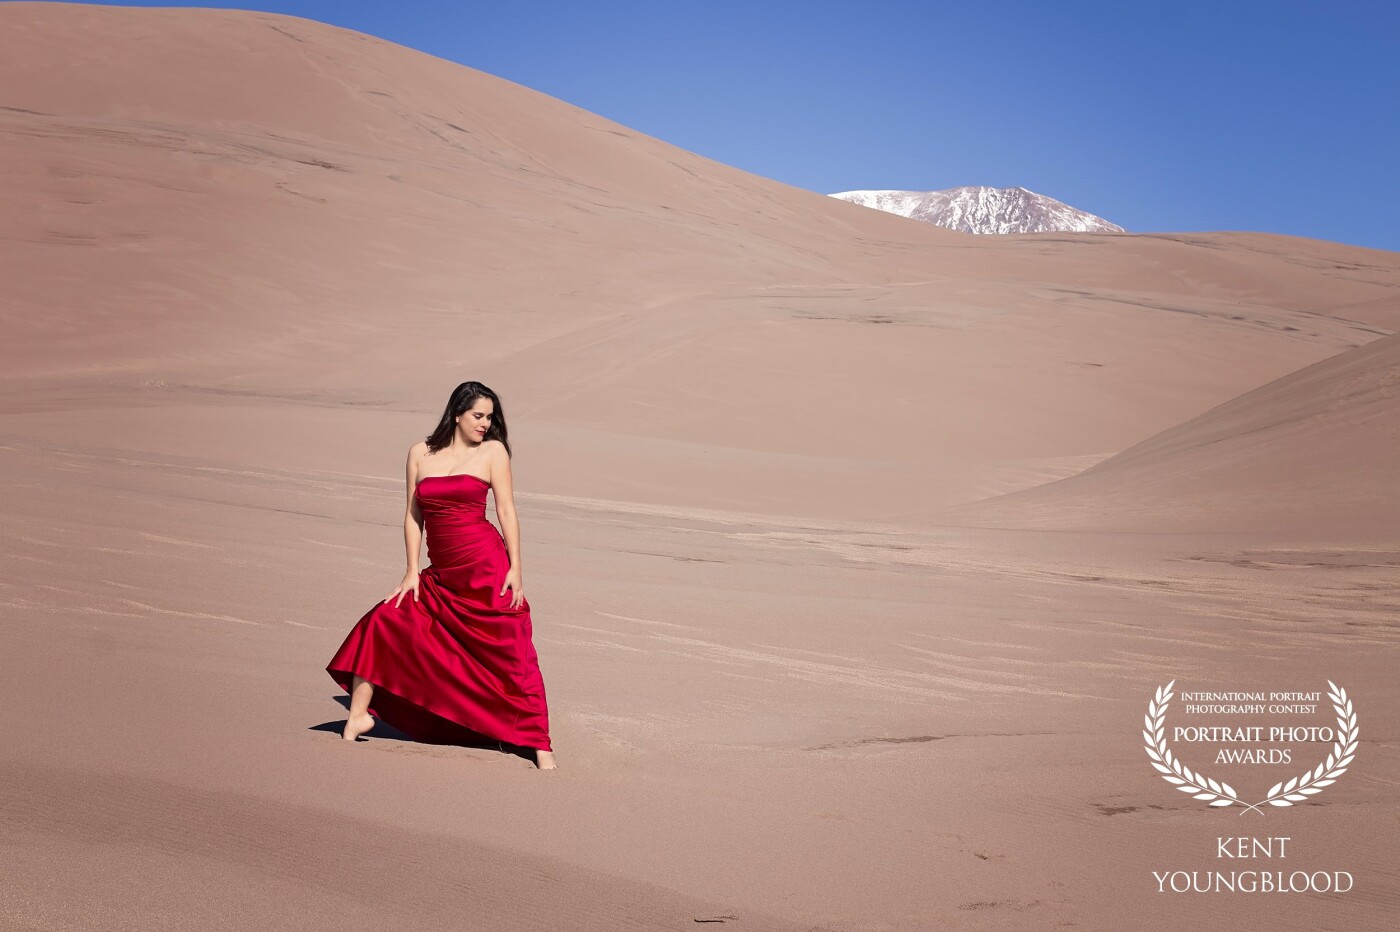 Deserts can make for very dramatic and beautiful landscapes and the Great Sand Dunes National Park in Colorado fits the bill. I wanted to balance the scale of the dunes with a small splash of red. The contrast in size and color of elements makes this one of my favorite shots.